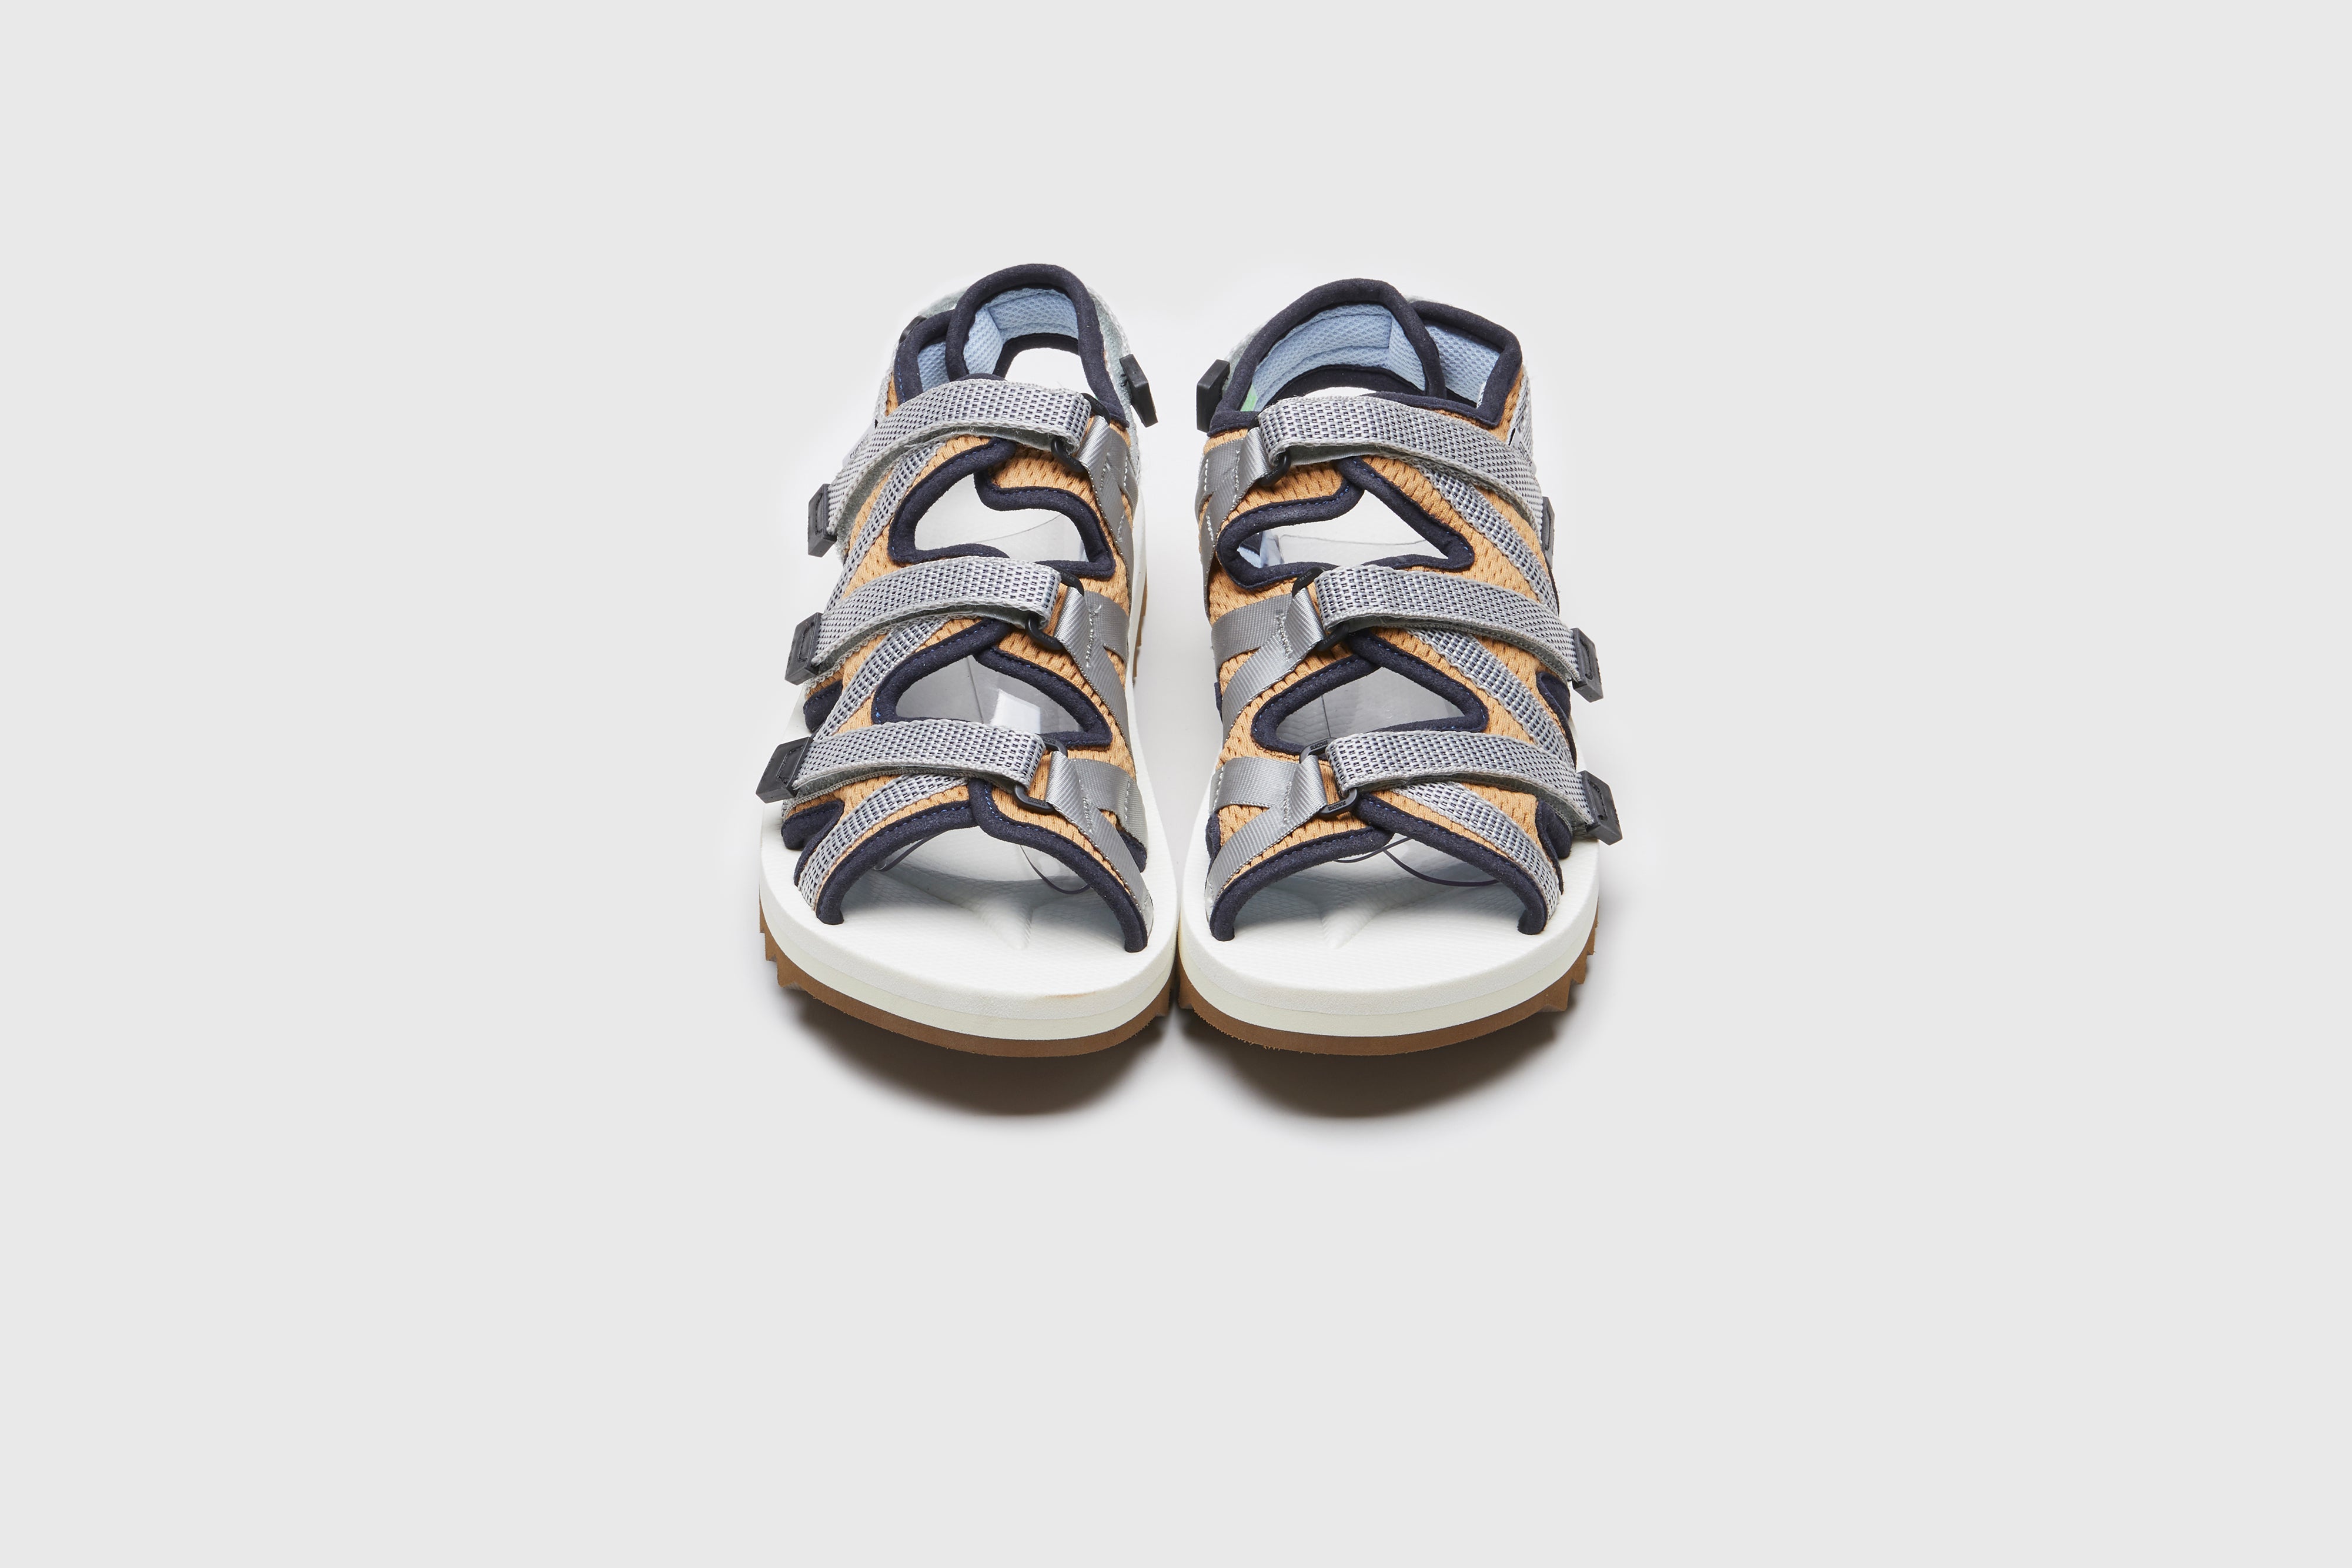 SUICOKE ZIP-ab sandals with navy &amp; white nylon upper, navy &amp; white midsole and sole, strap and logo patch. From Spring/Summer 2023 collection on eightywingold Web Store, an official partner of SUICOKE. OG-229AB NAVY X WHITE